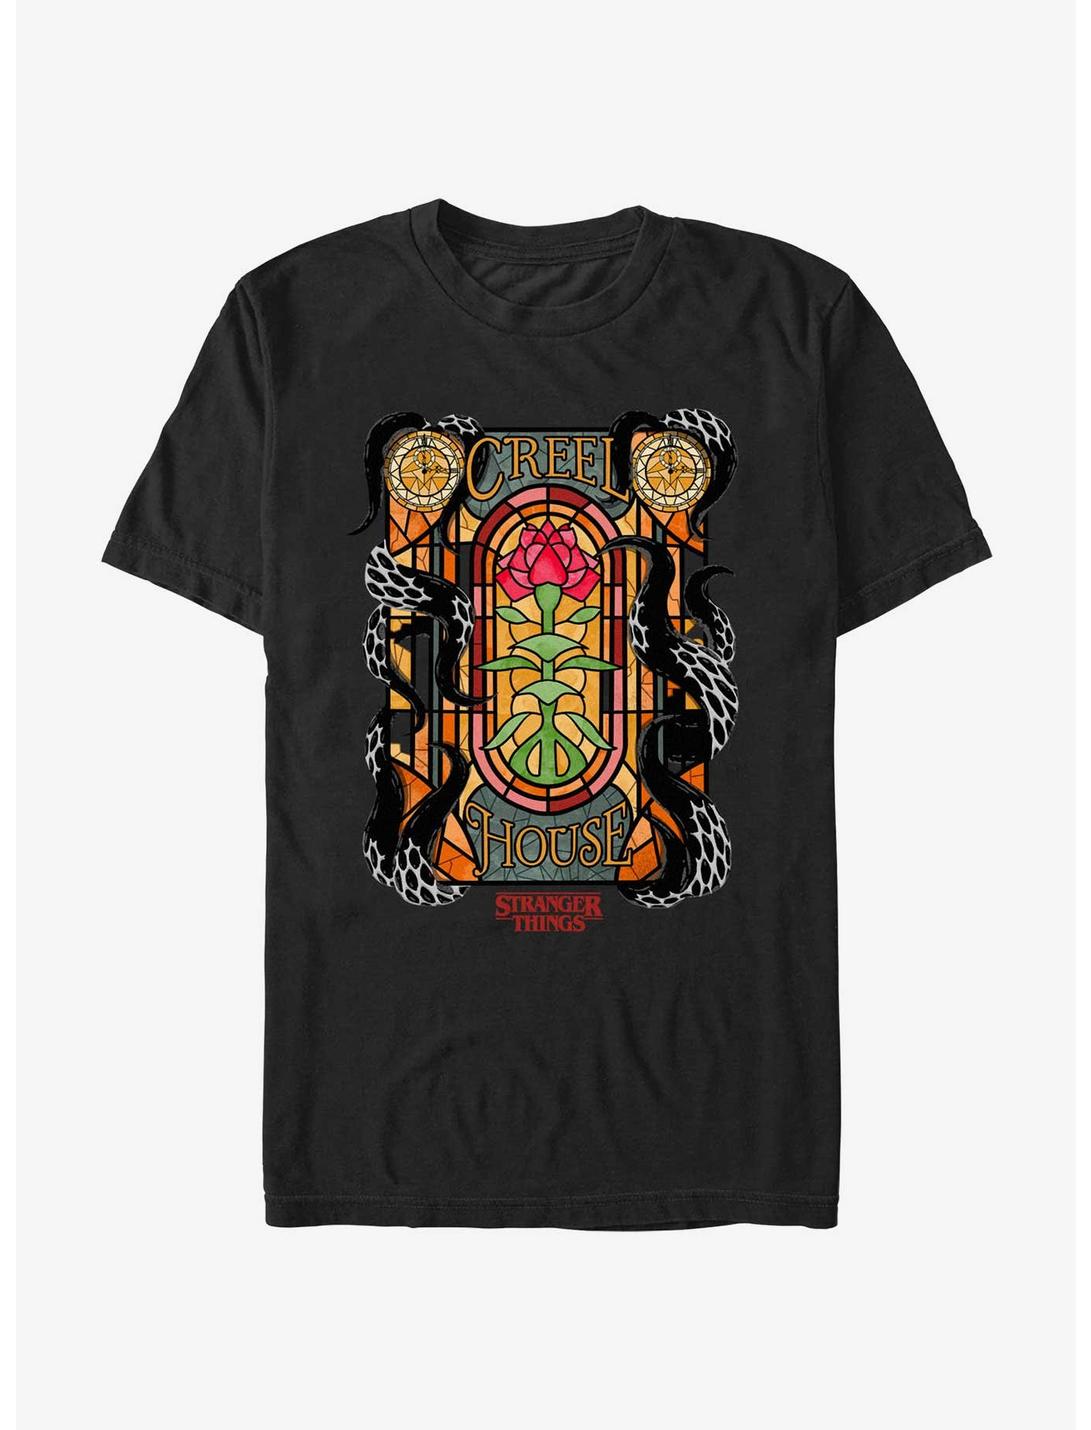 Stranger Things Creel House Stained Glass Door T-Shirt, BLACK, hi-res